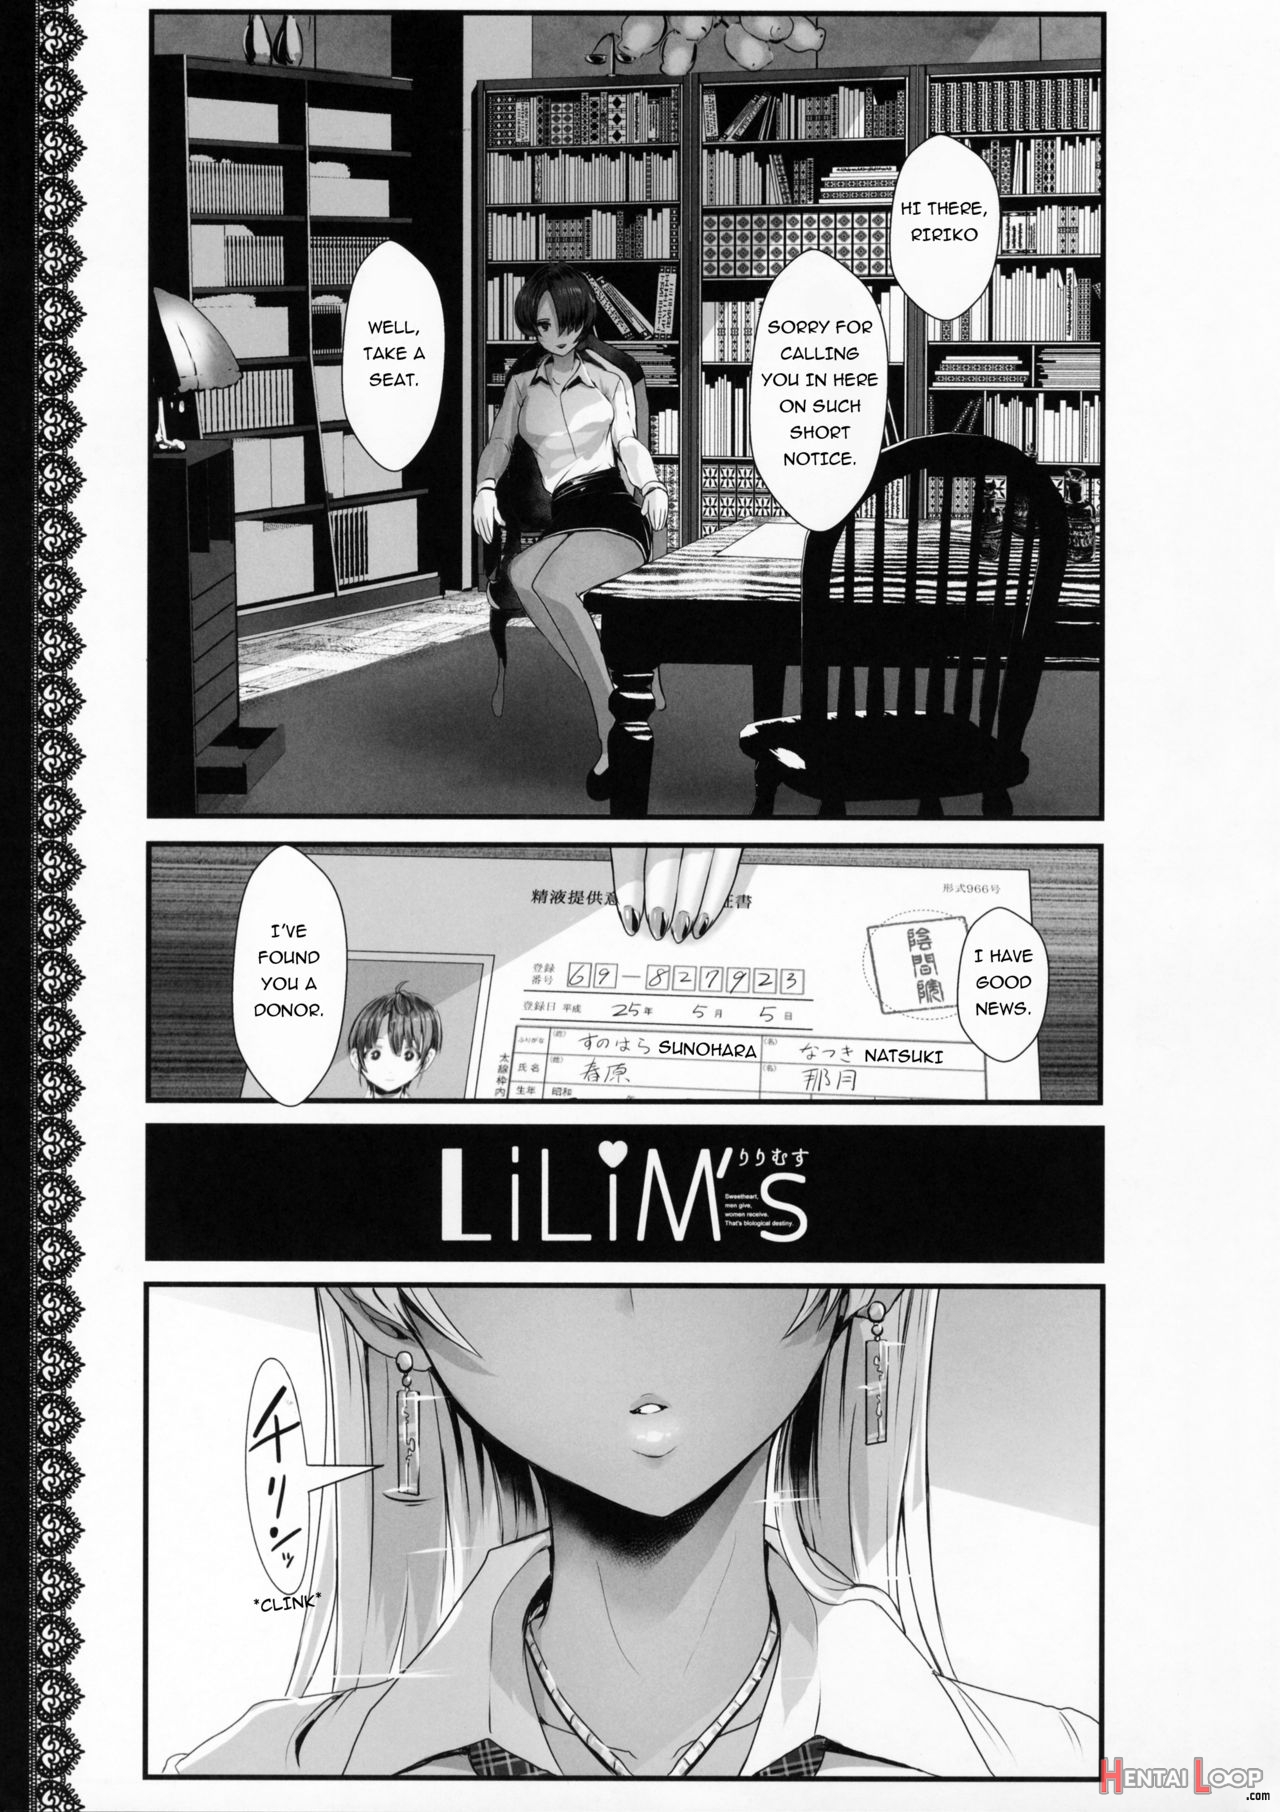 Lilim's page 2